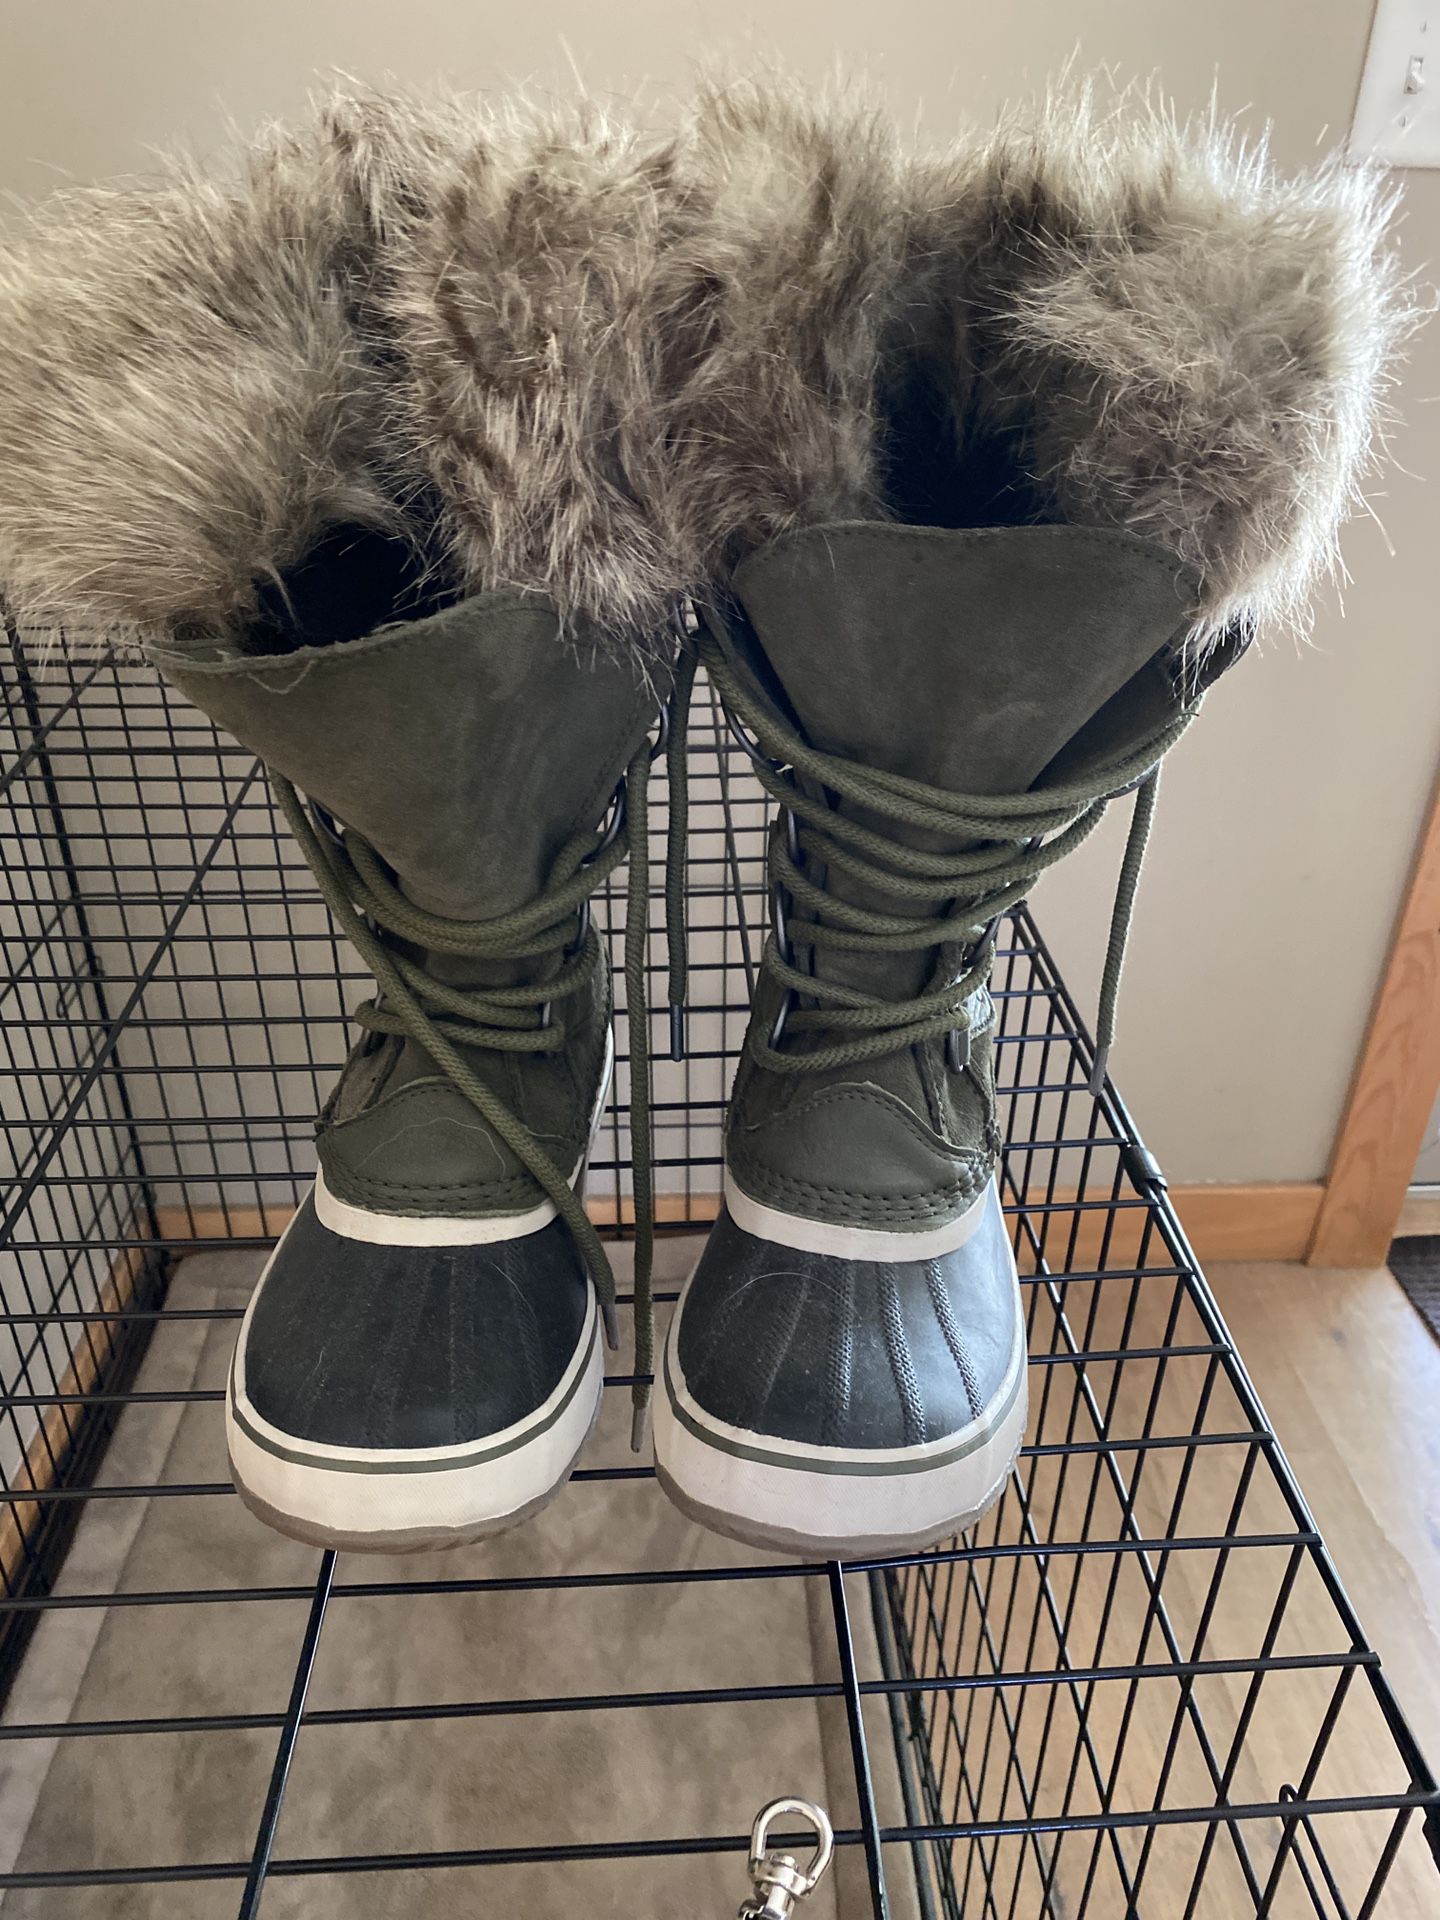 Sorrel Winter boots size 8